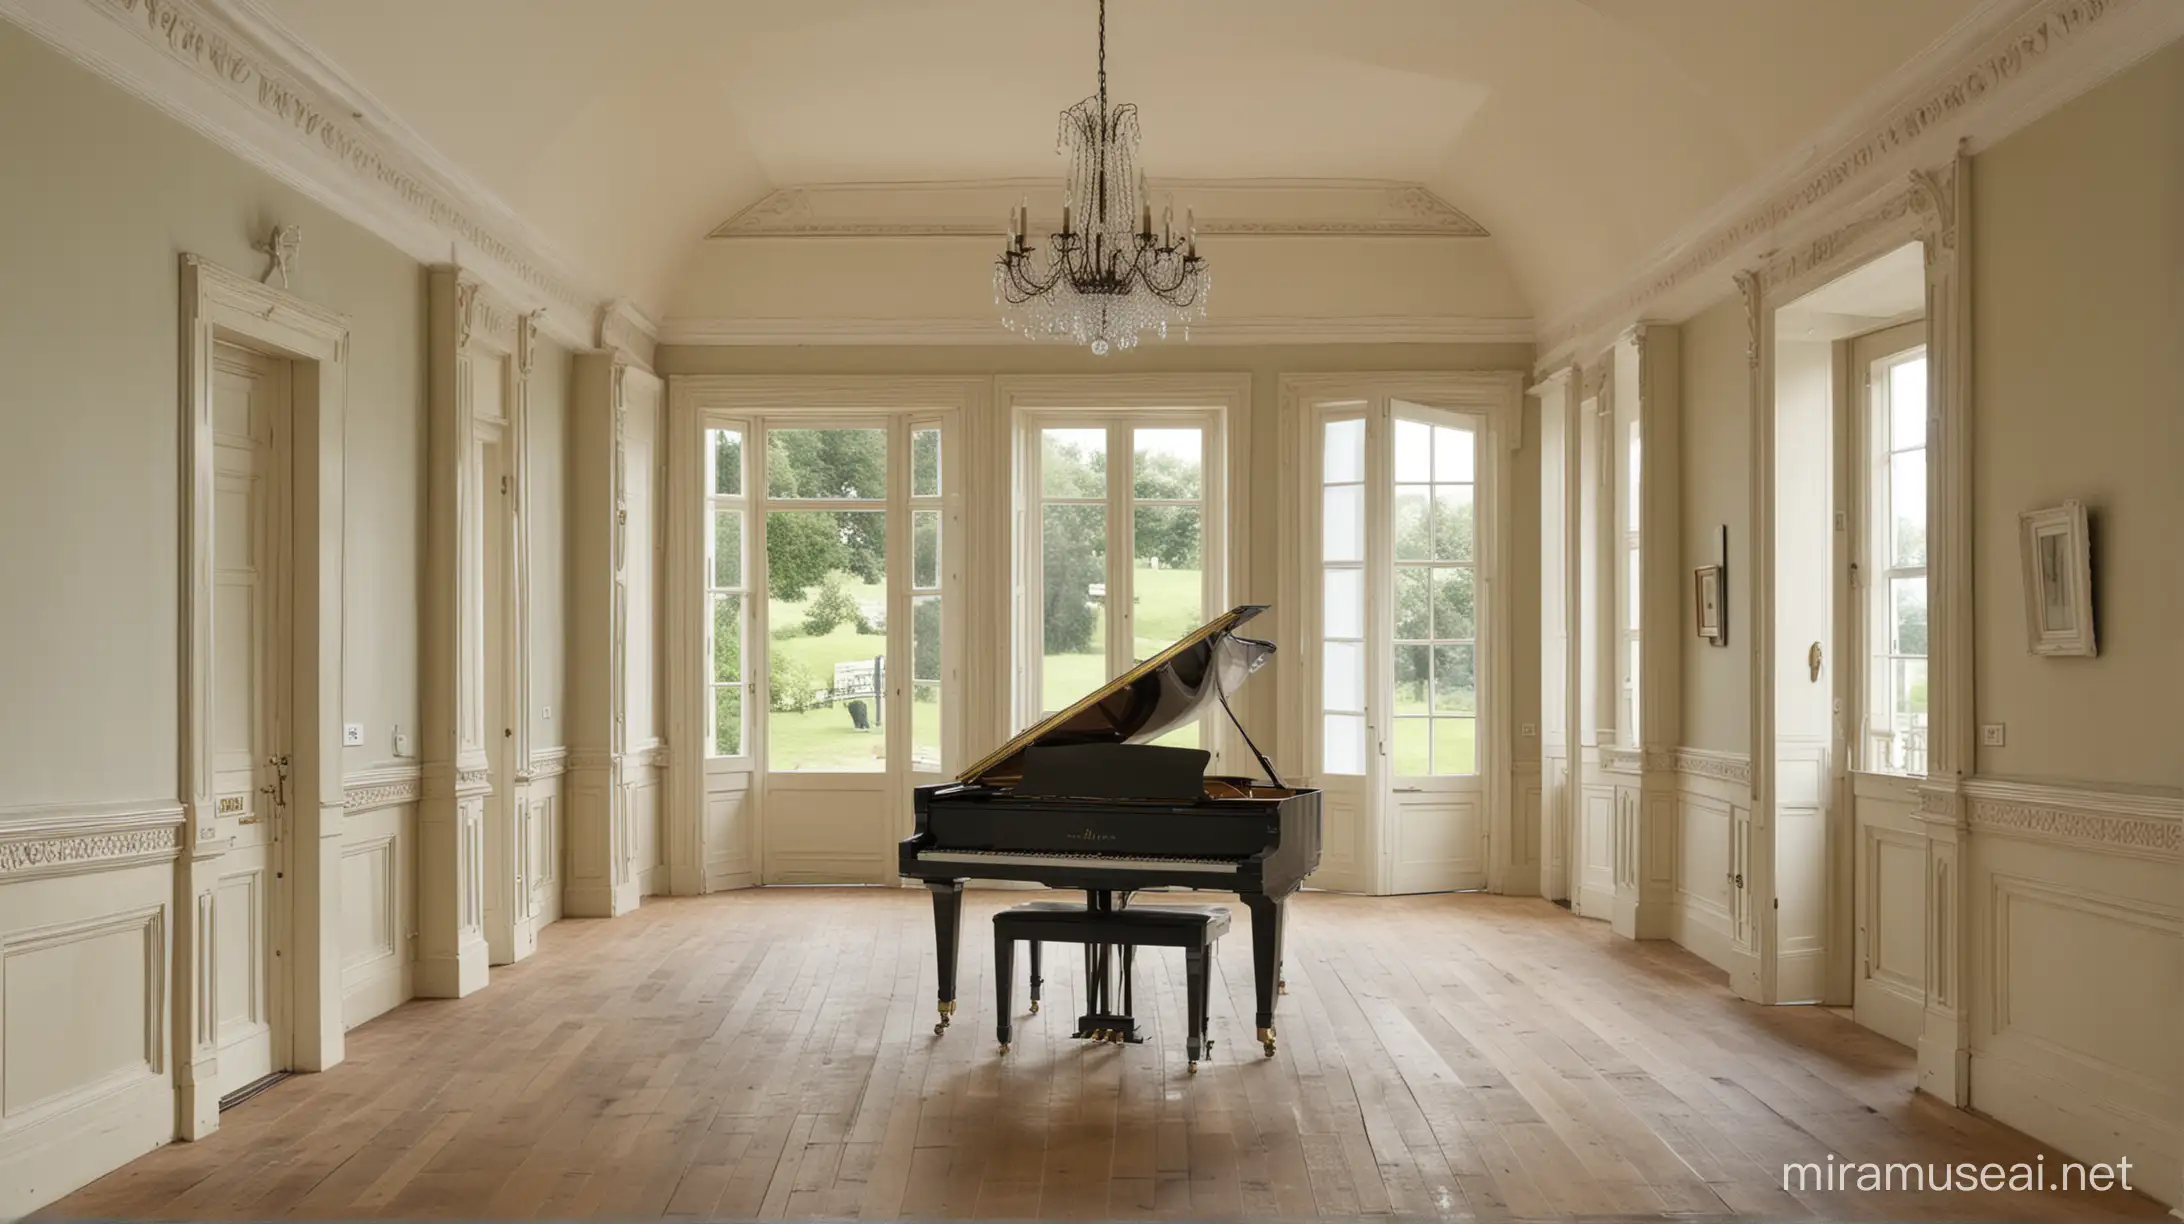 Elegant Piano Performance in Grand Hall with Serene Landscape View